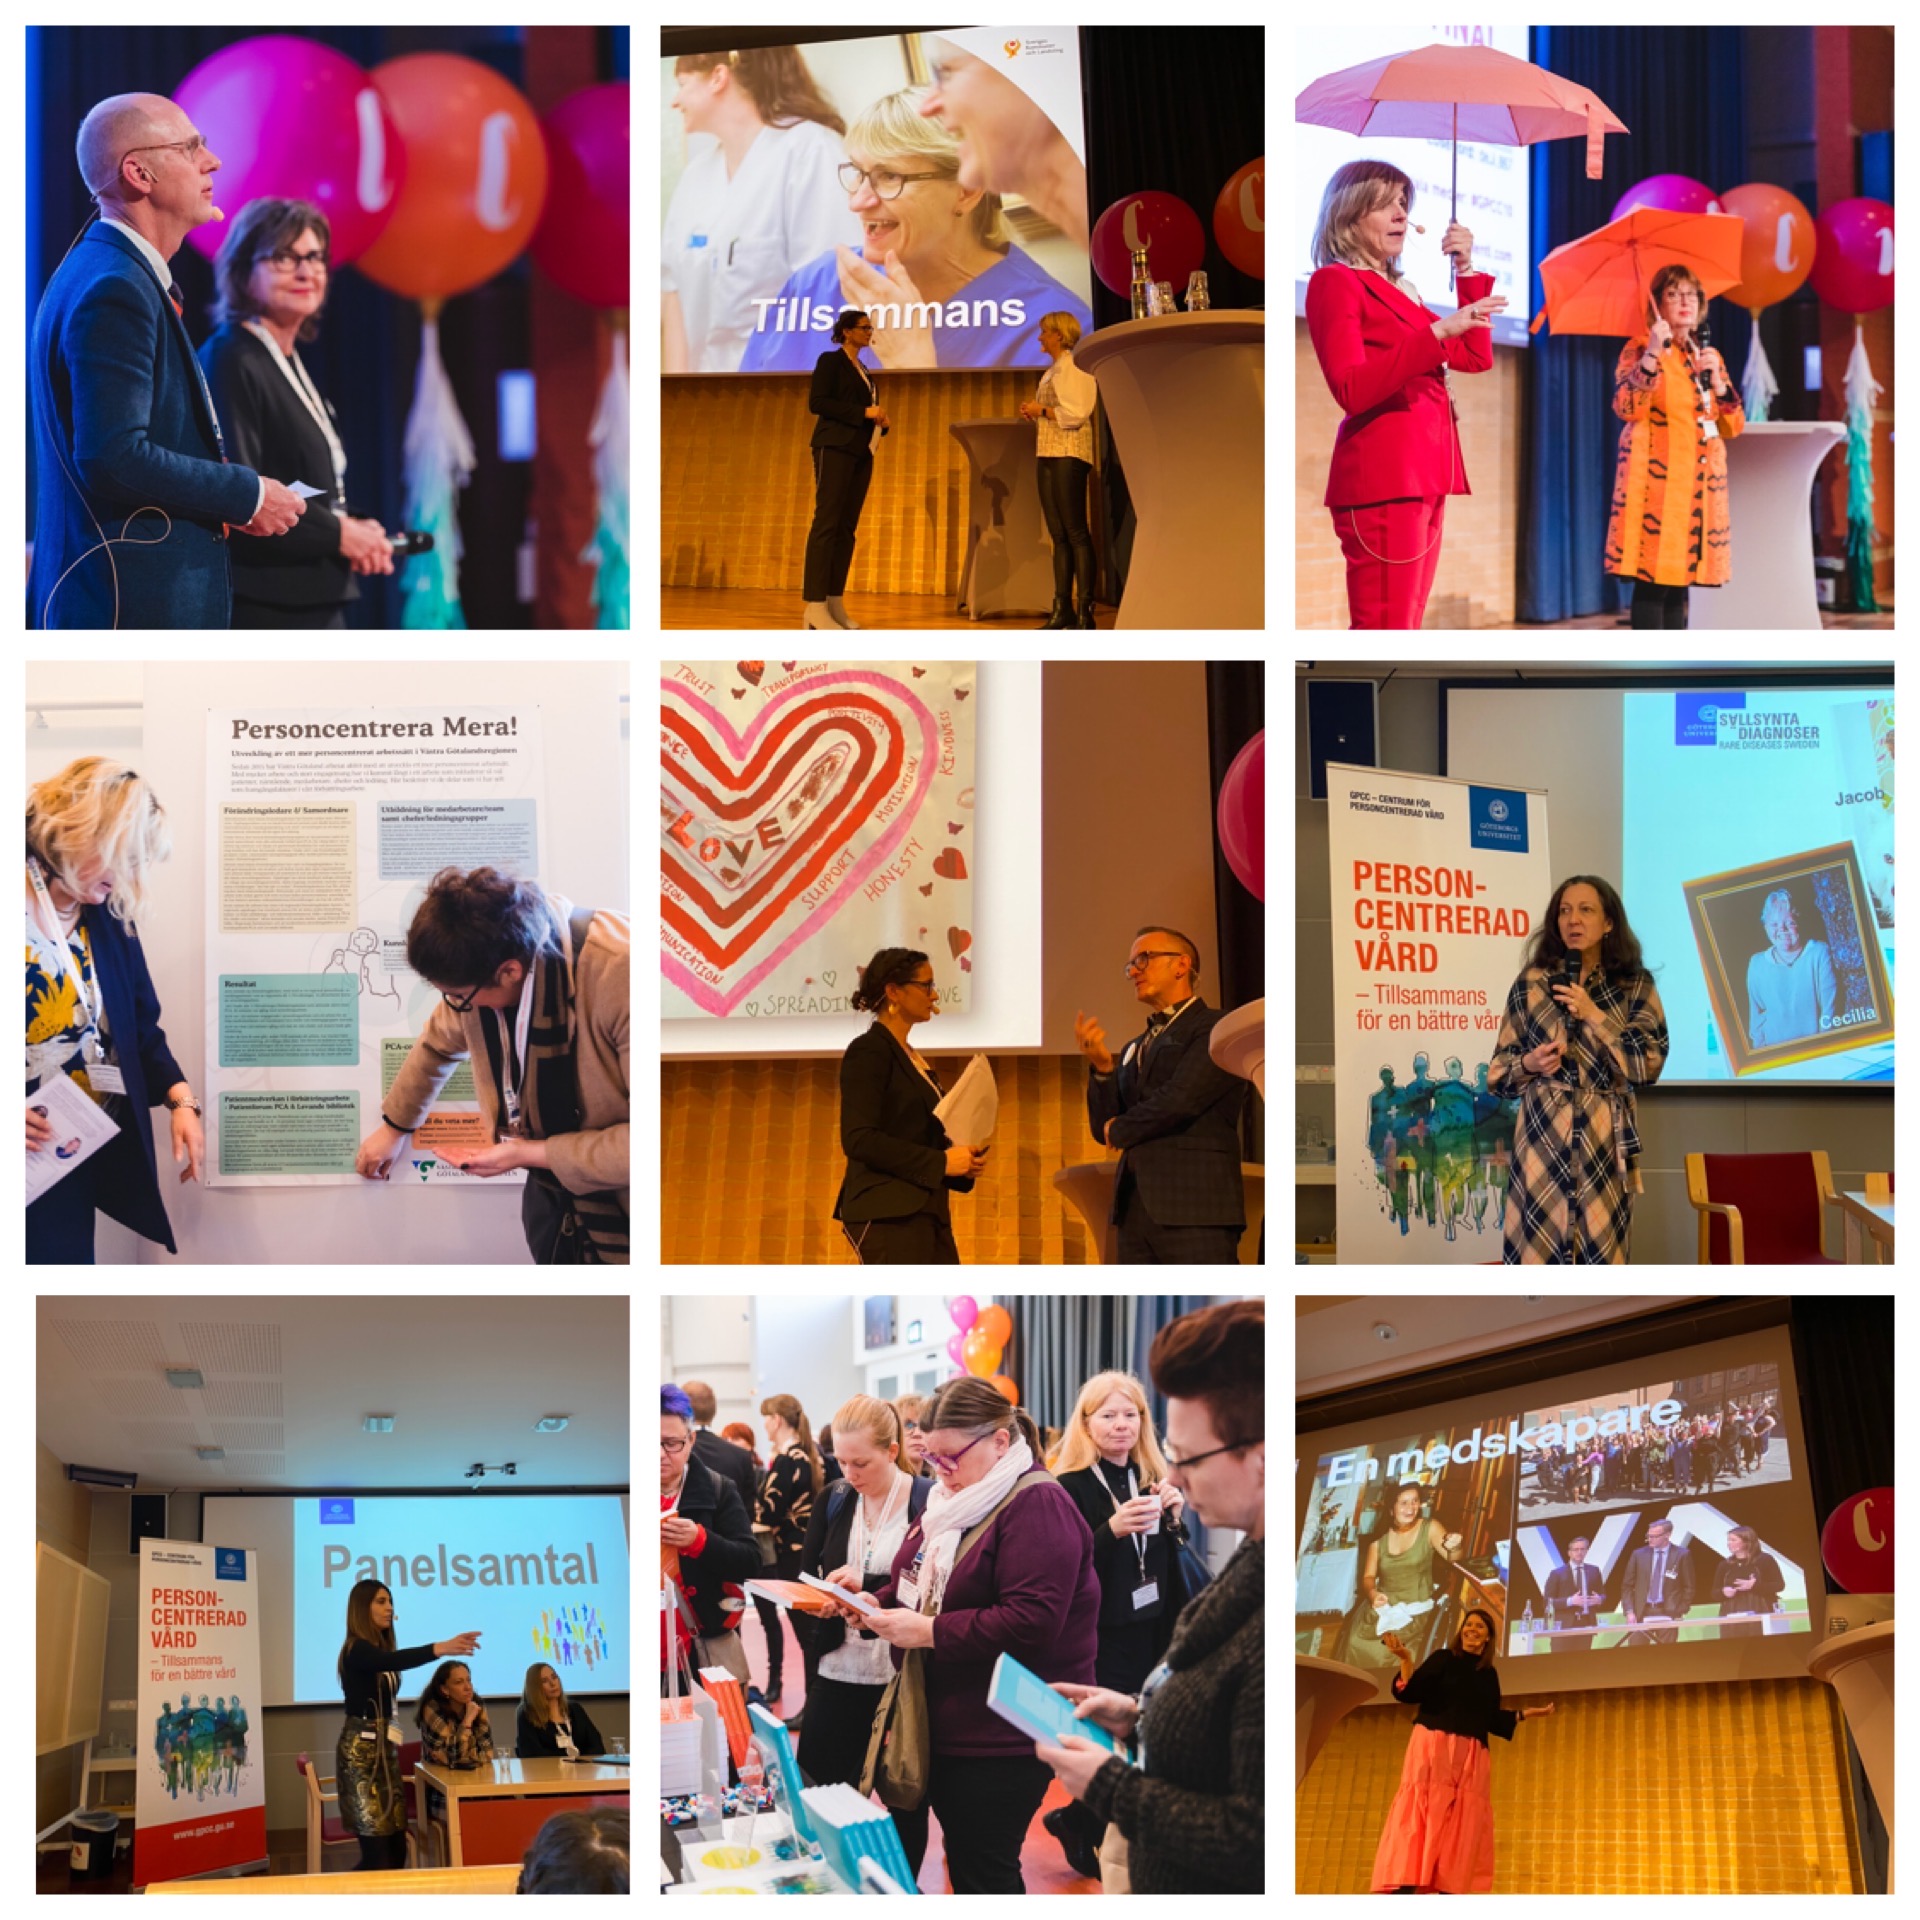 Collage of pictures from the conference